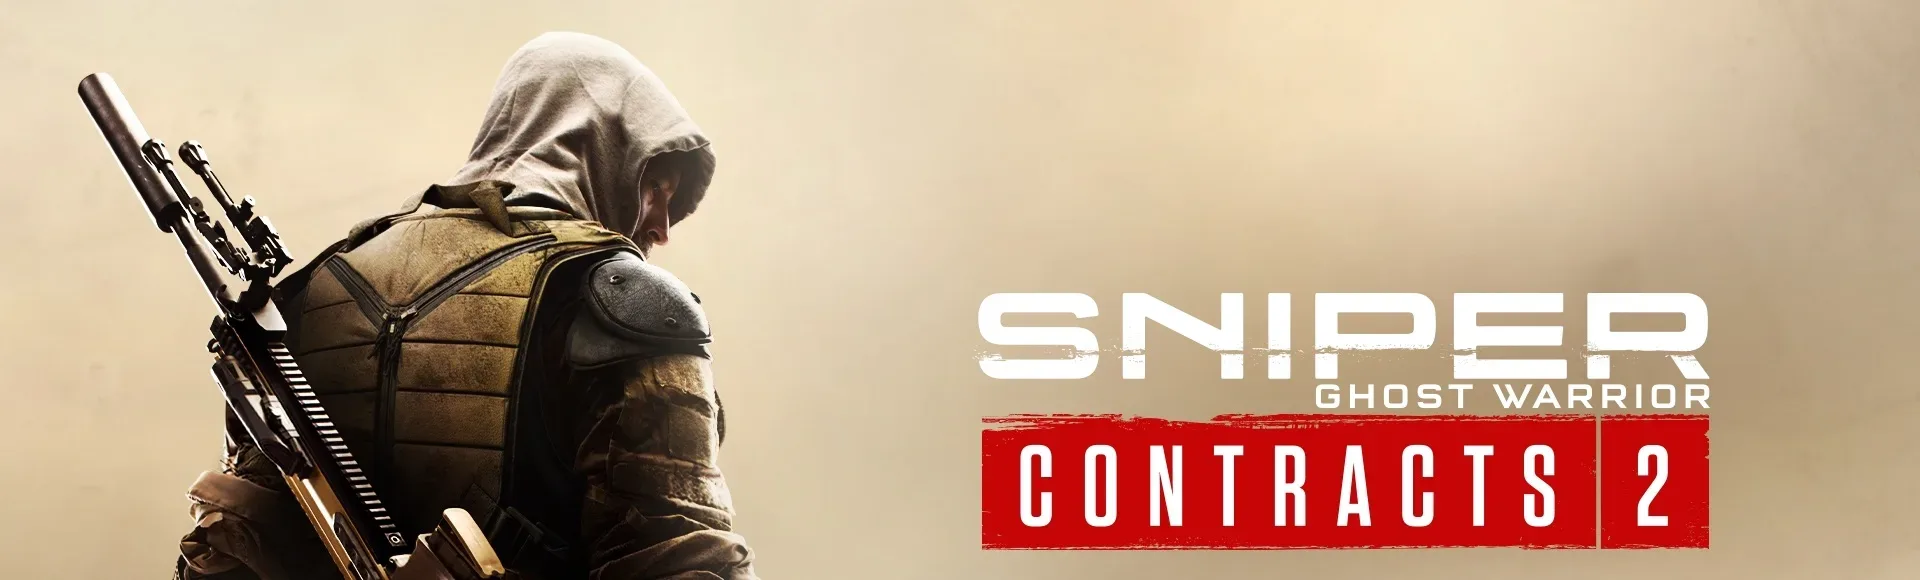 Sniper Ghost Warrior Contracts 2 Revealed